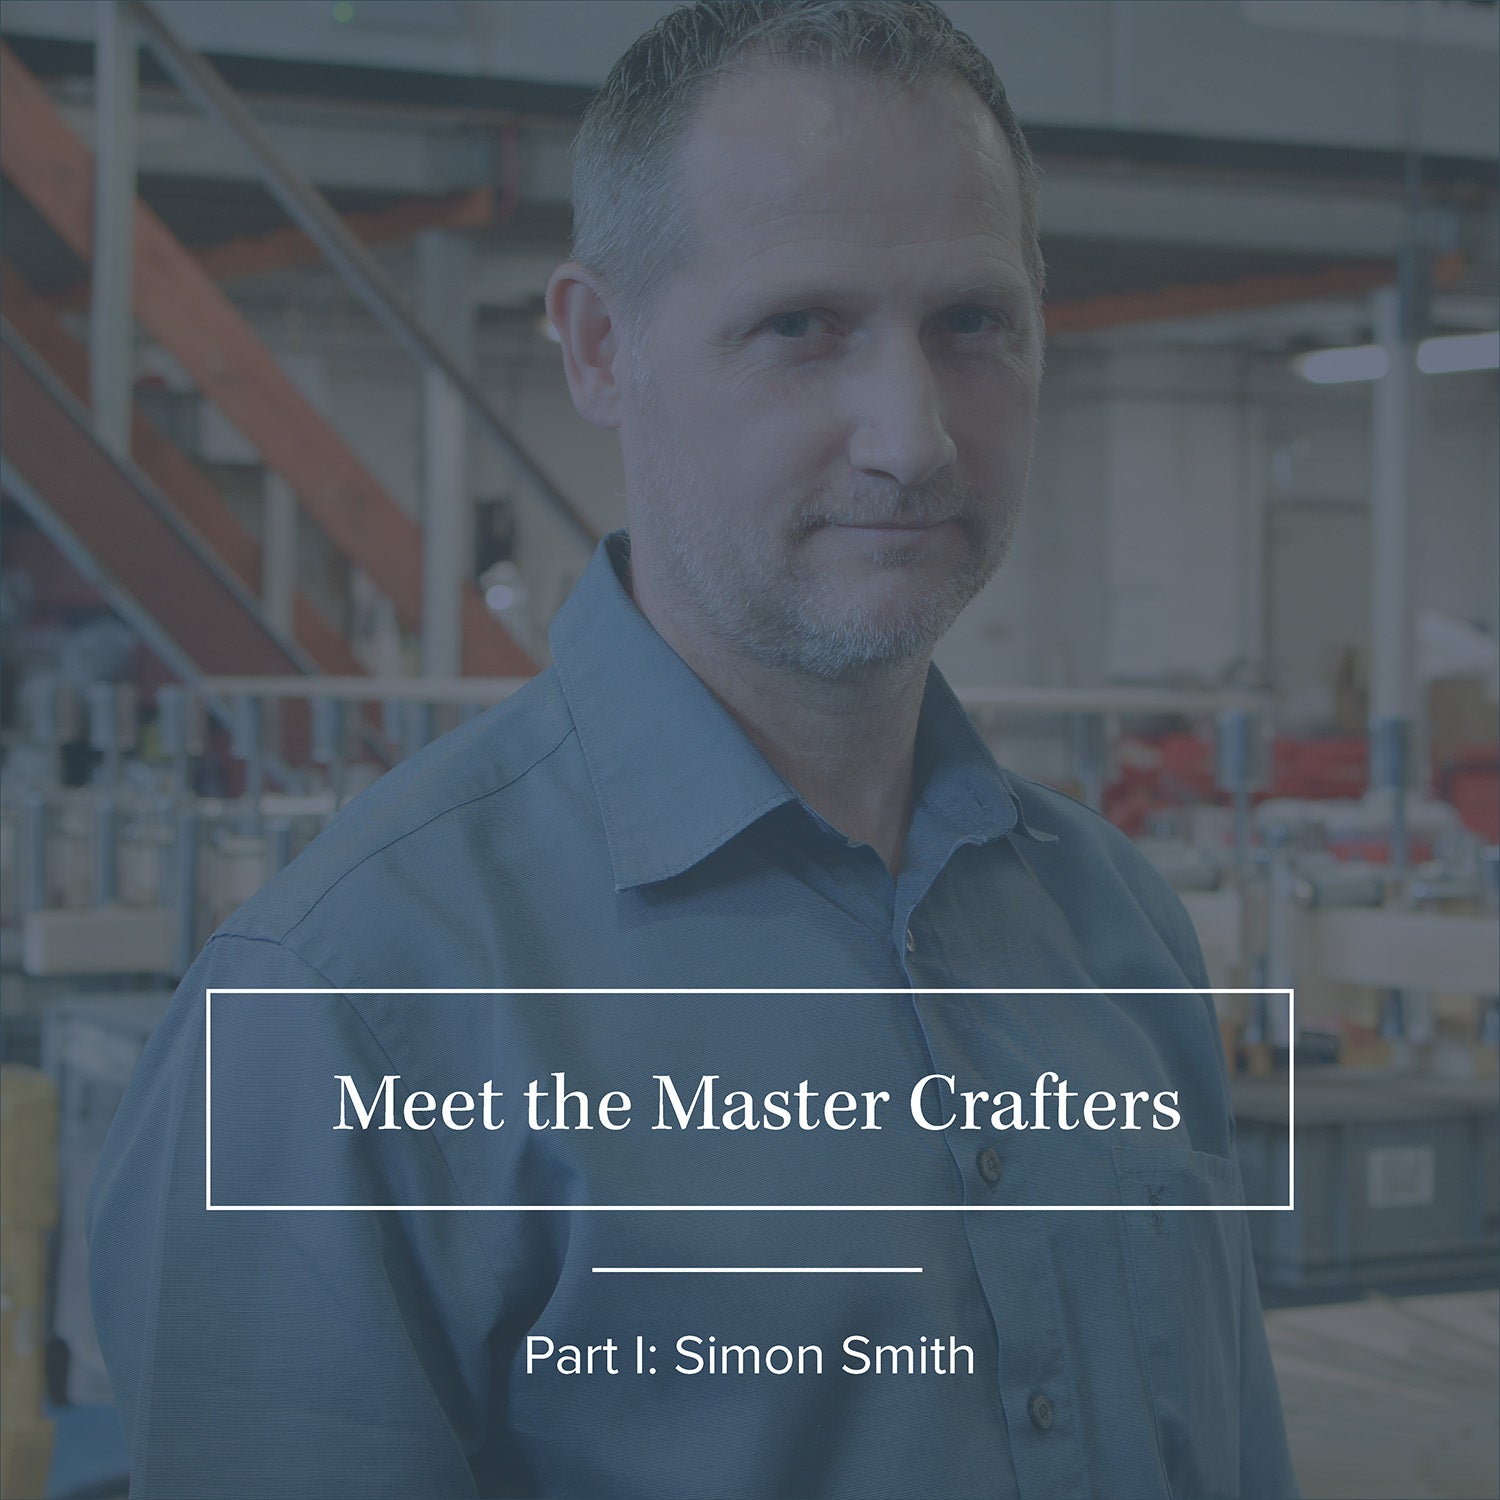 Meet the Master Crafters: Part I